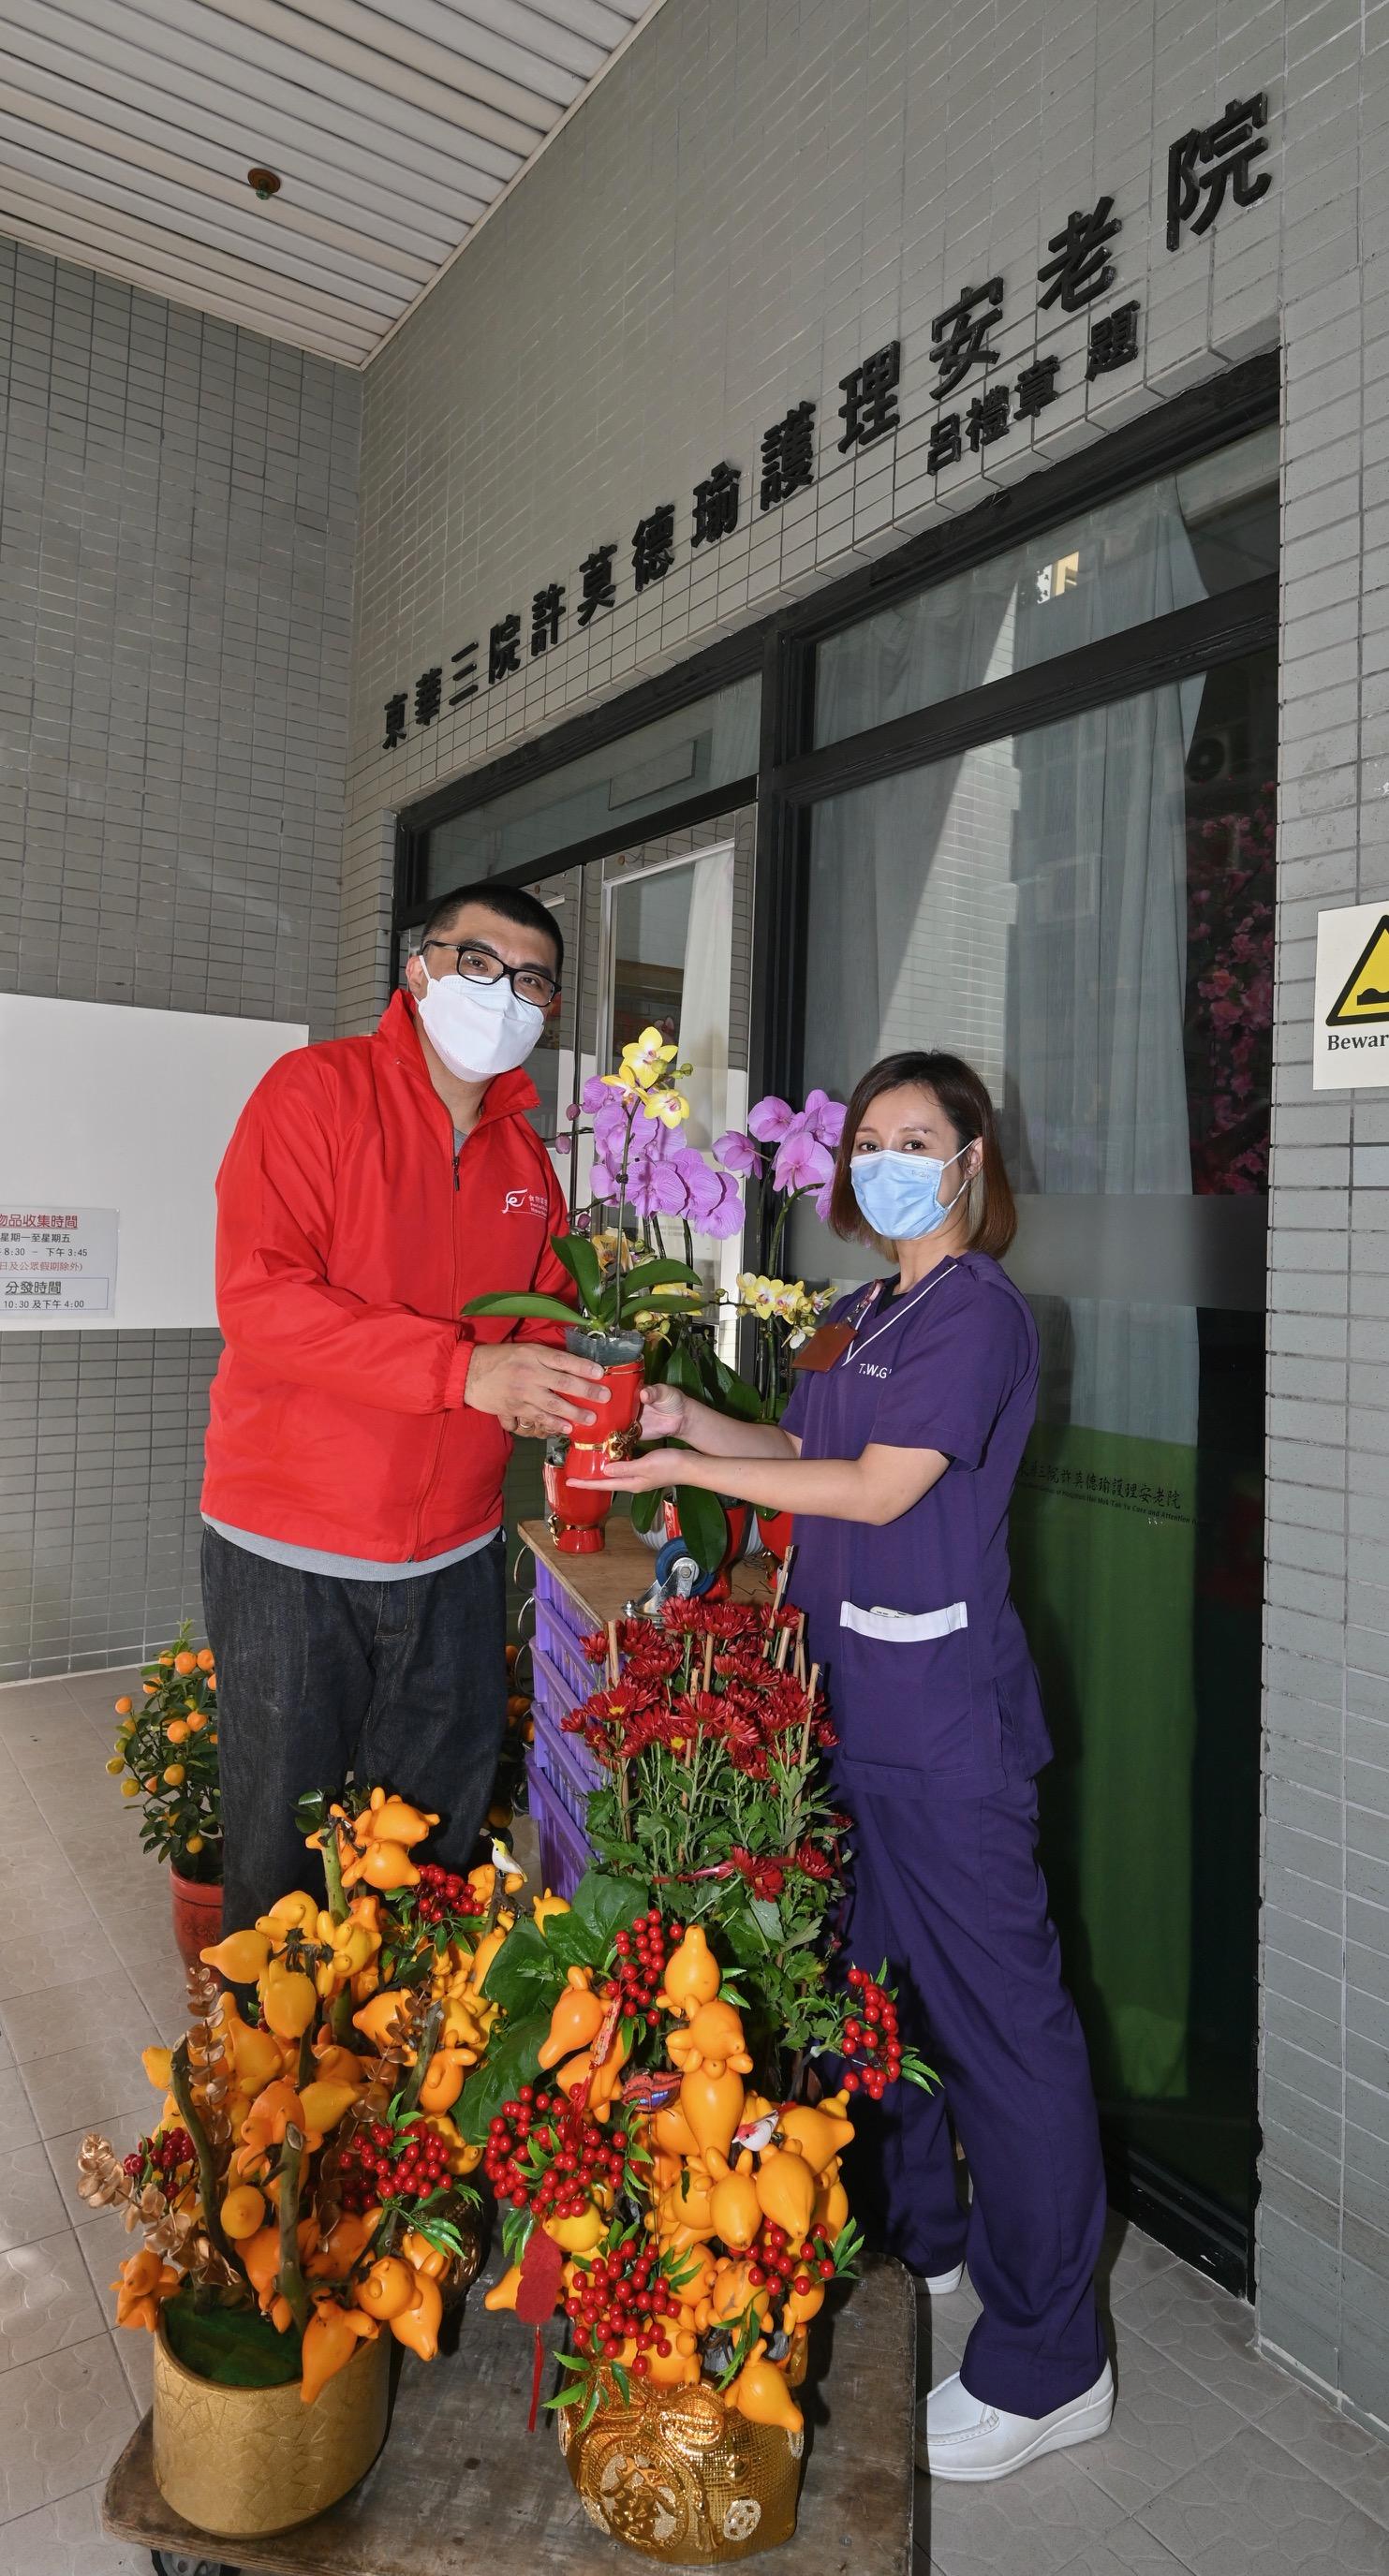 Volunteer teams of the Food and Environmental Hygiene Department today (January 22) assisted the department to deliver unsold pots of flowers and plants donated by Lunar New Year fair vendors to elderly homes/residential care homes for persons with disabilities and to public hospitals. Photo shows volunteer delivering pots of flowers to representative of a home for the elderly.